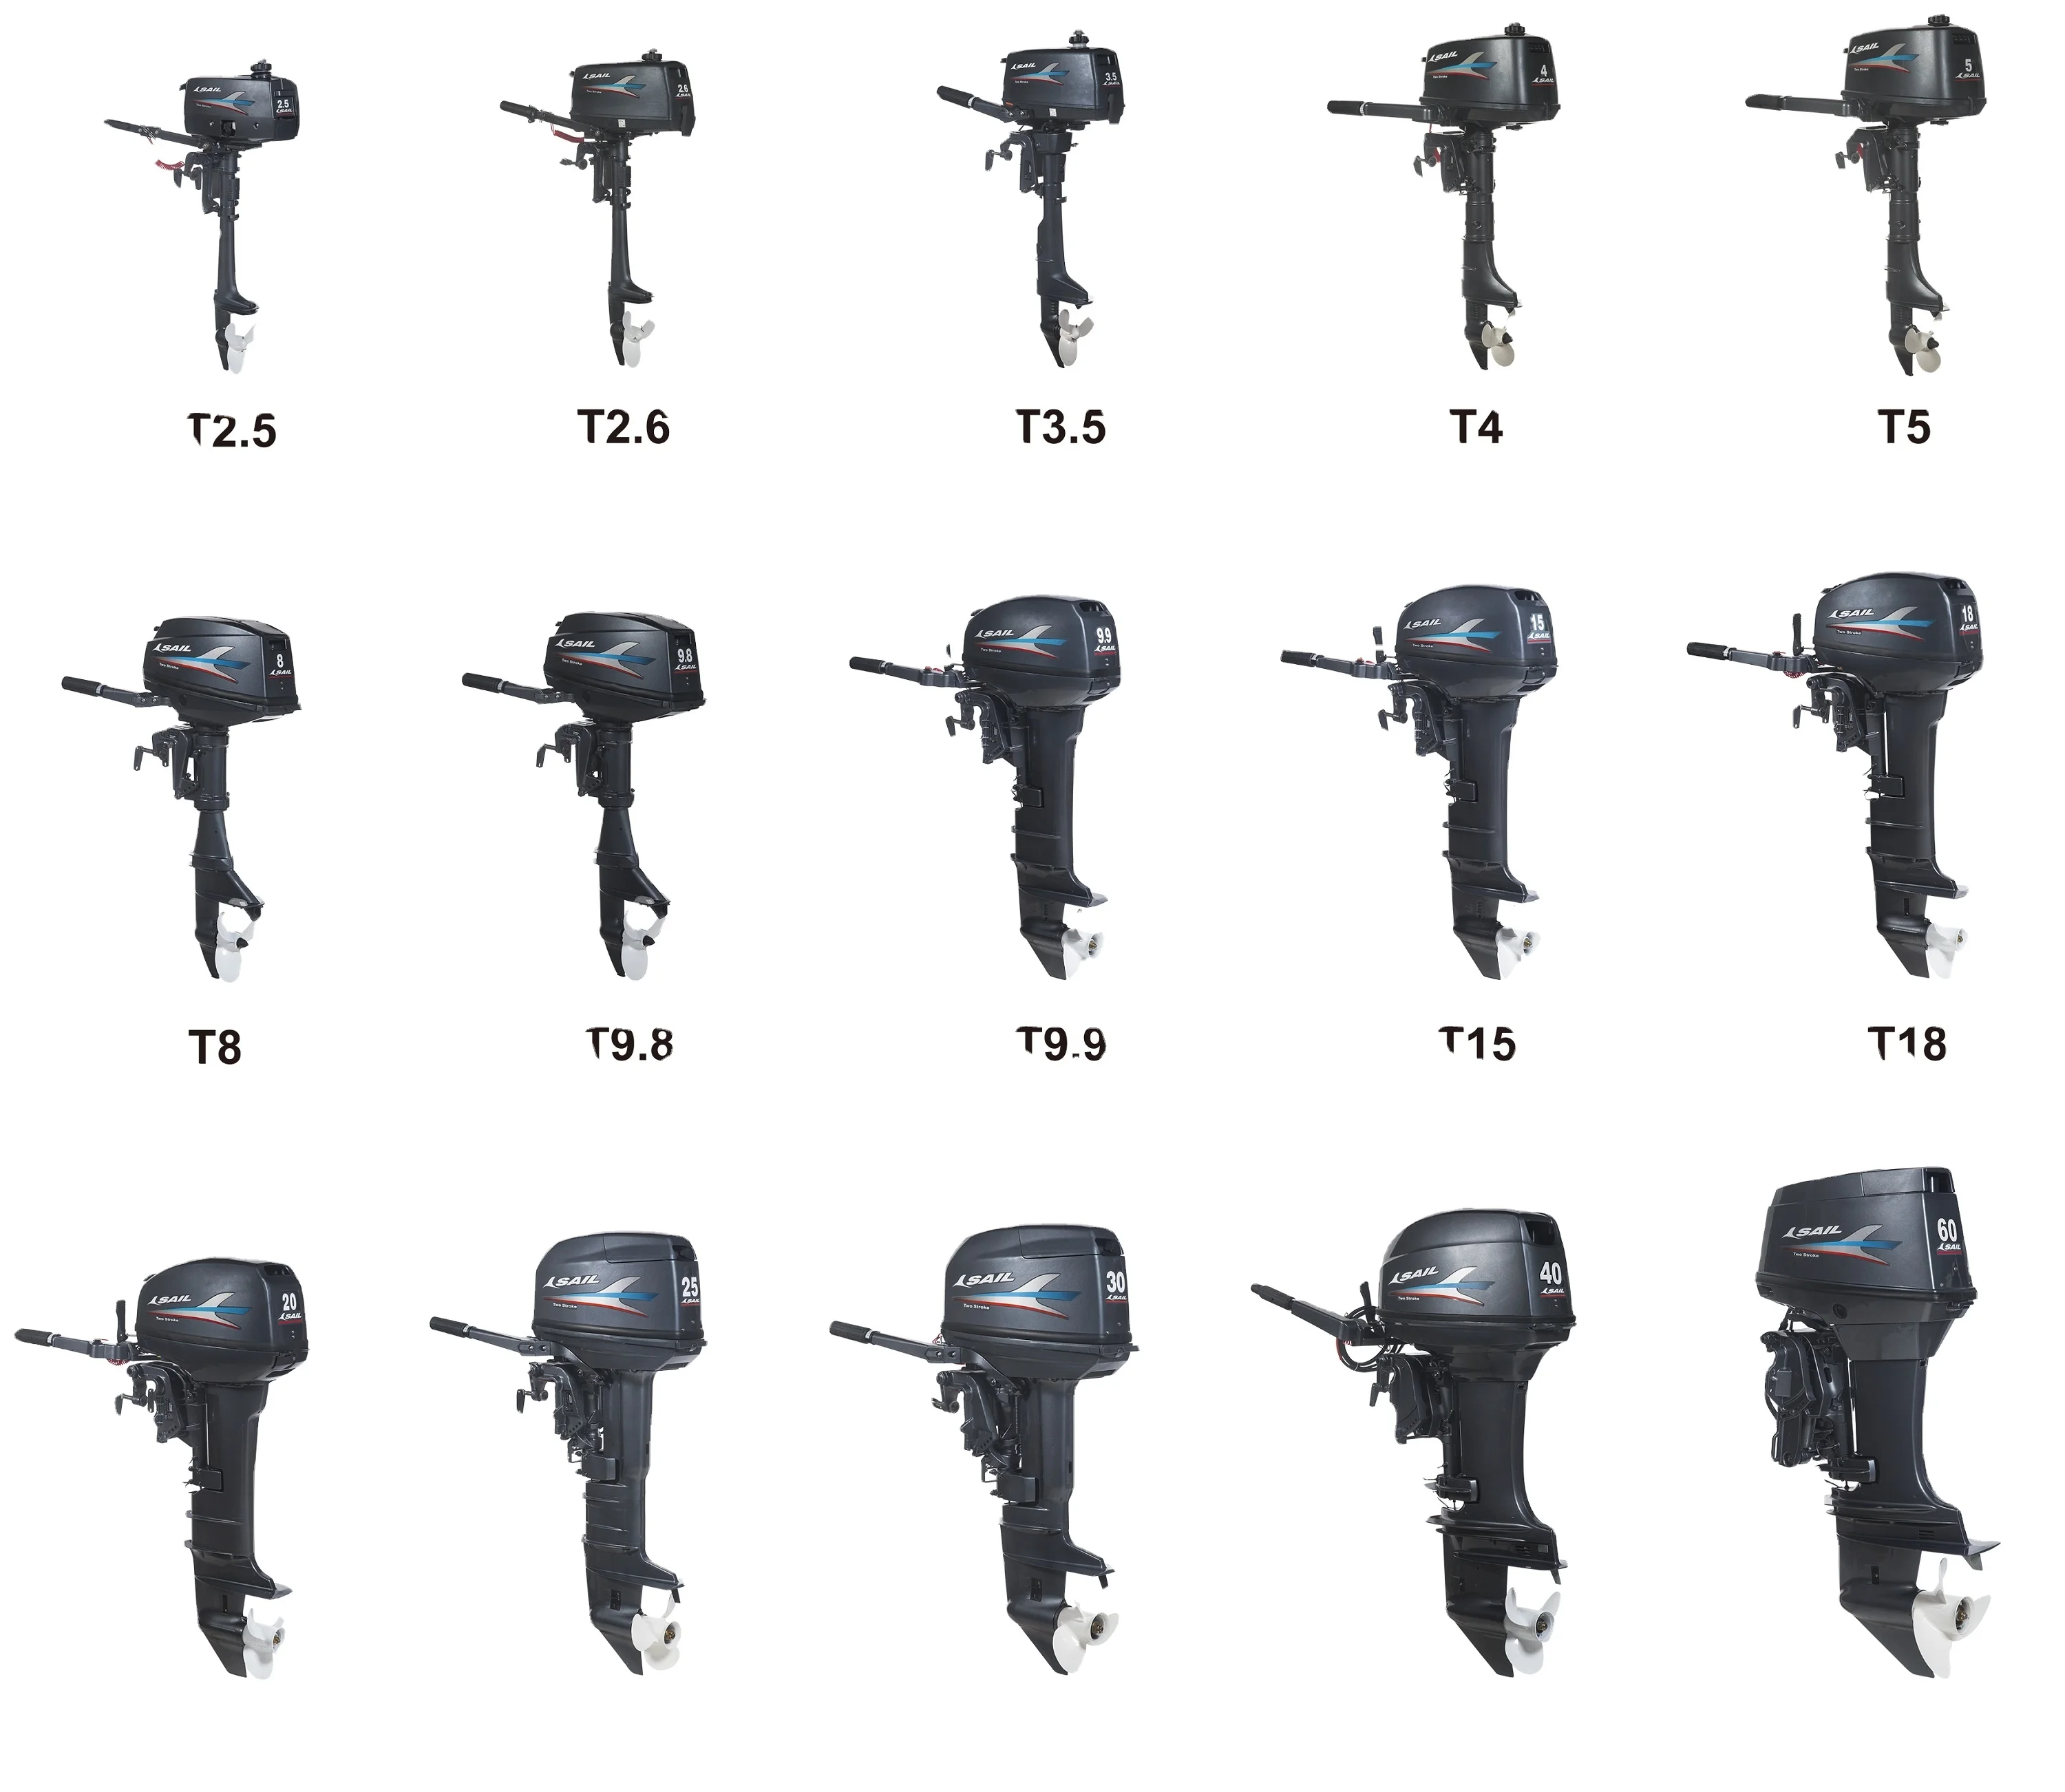 Hot Sale Promotion 40hp Jet boat engine outboard motors Ready To Ship (10000005893538)